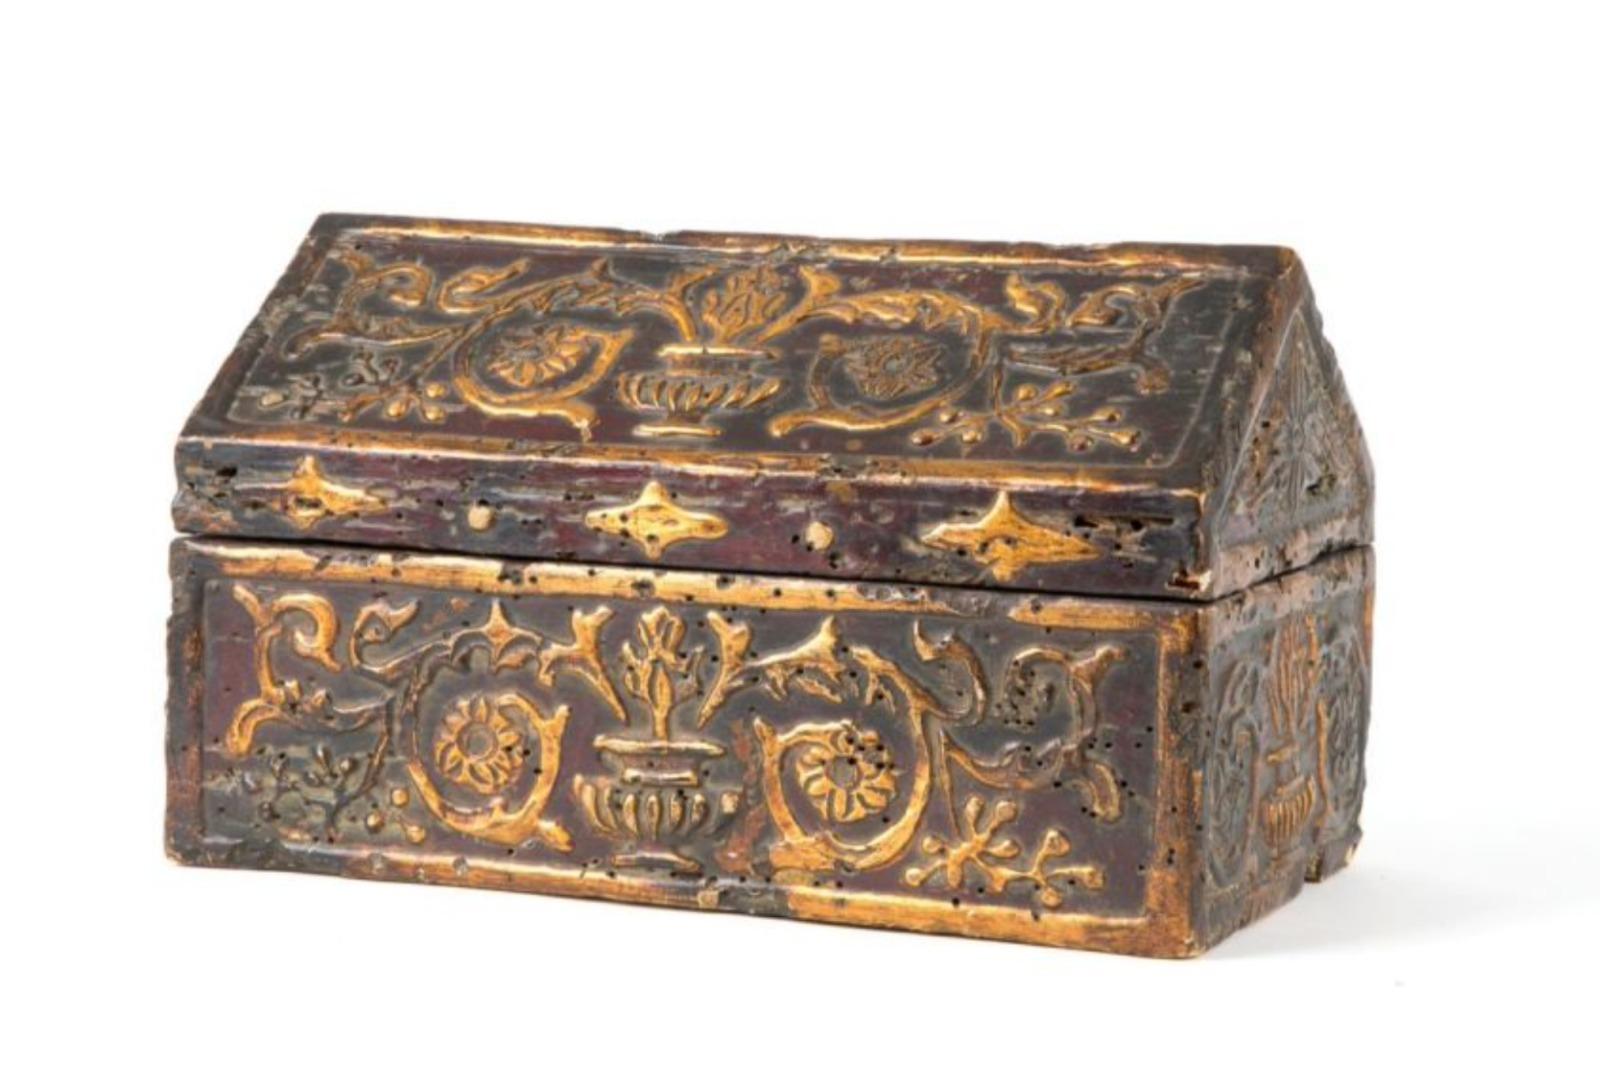 Gothic Northern Italy Box Set with 16th Century Floral Motifs